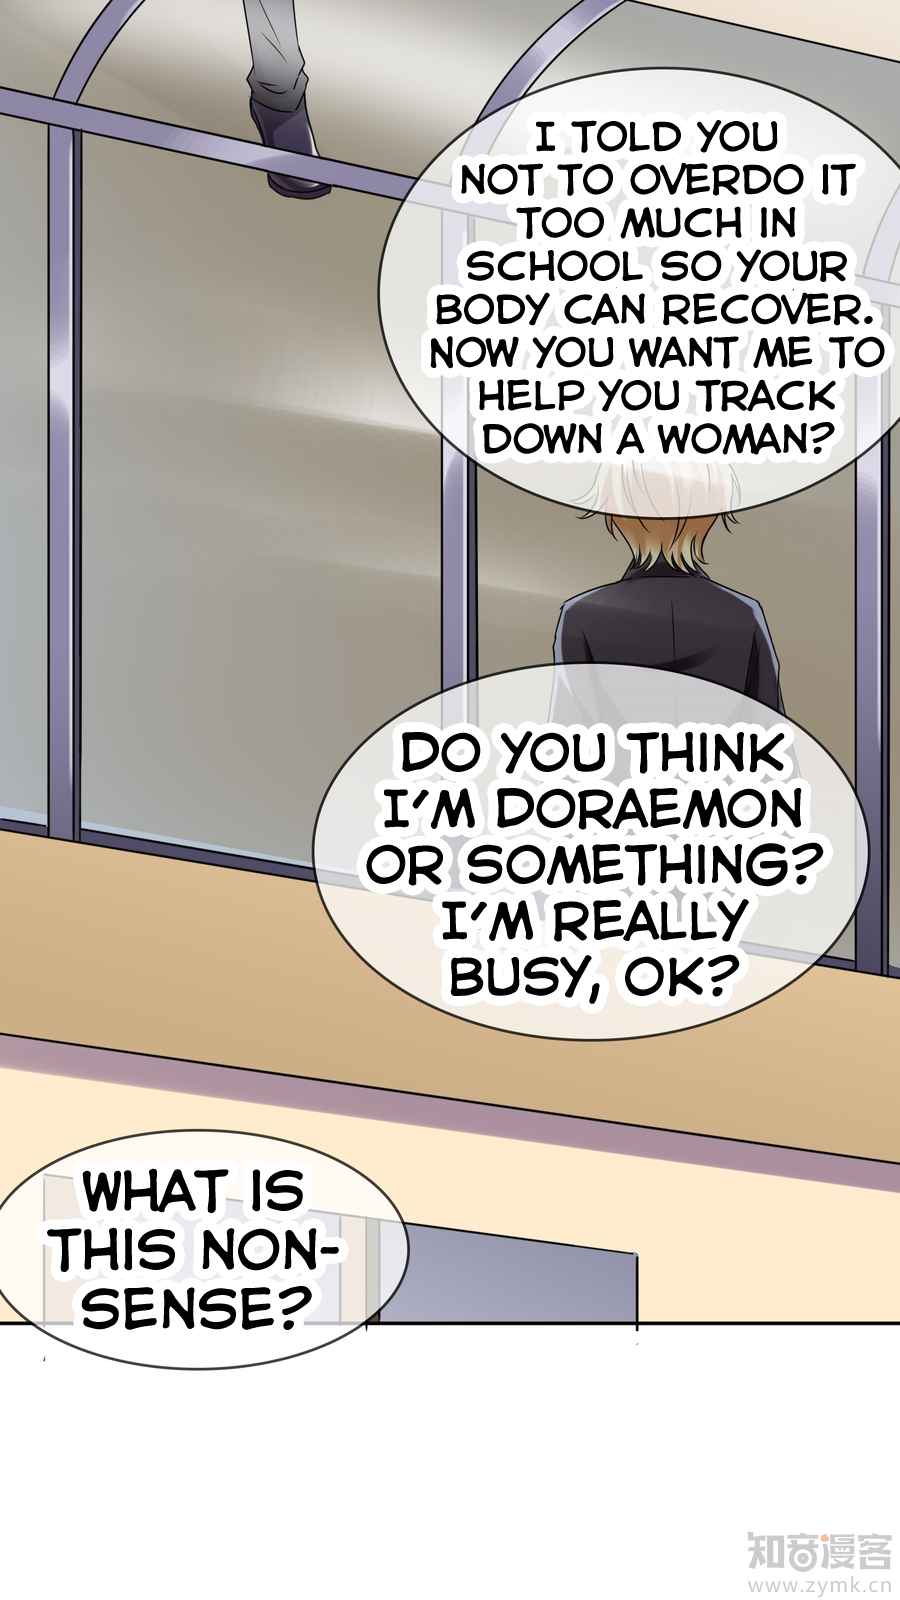 Overbearing Loyal Dog Looking for Love Ch. 25 Disappear